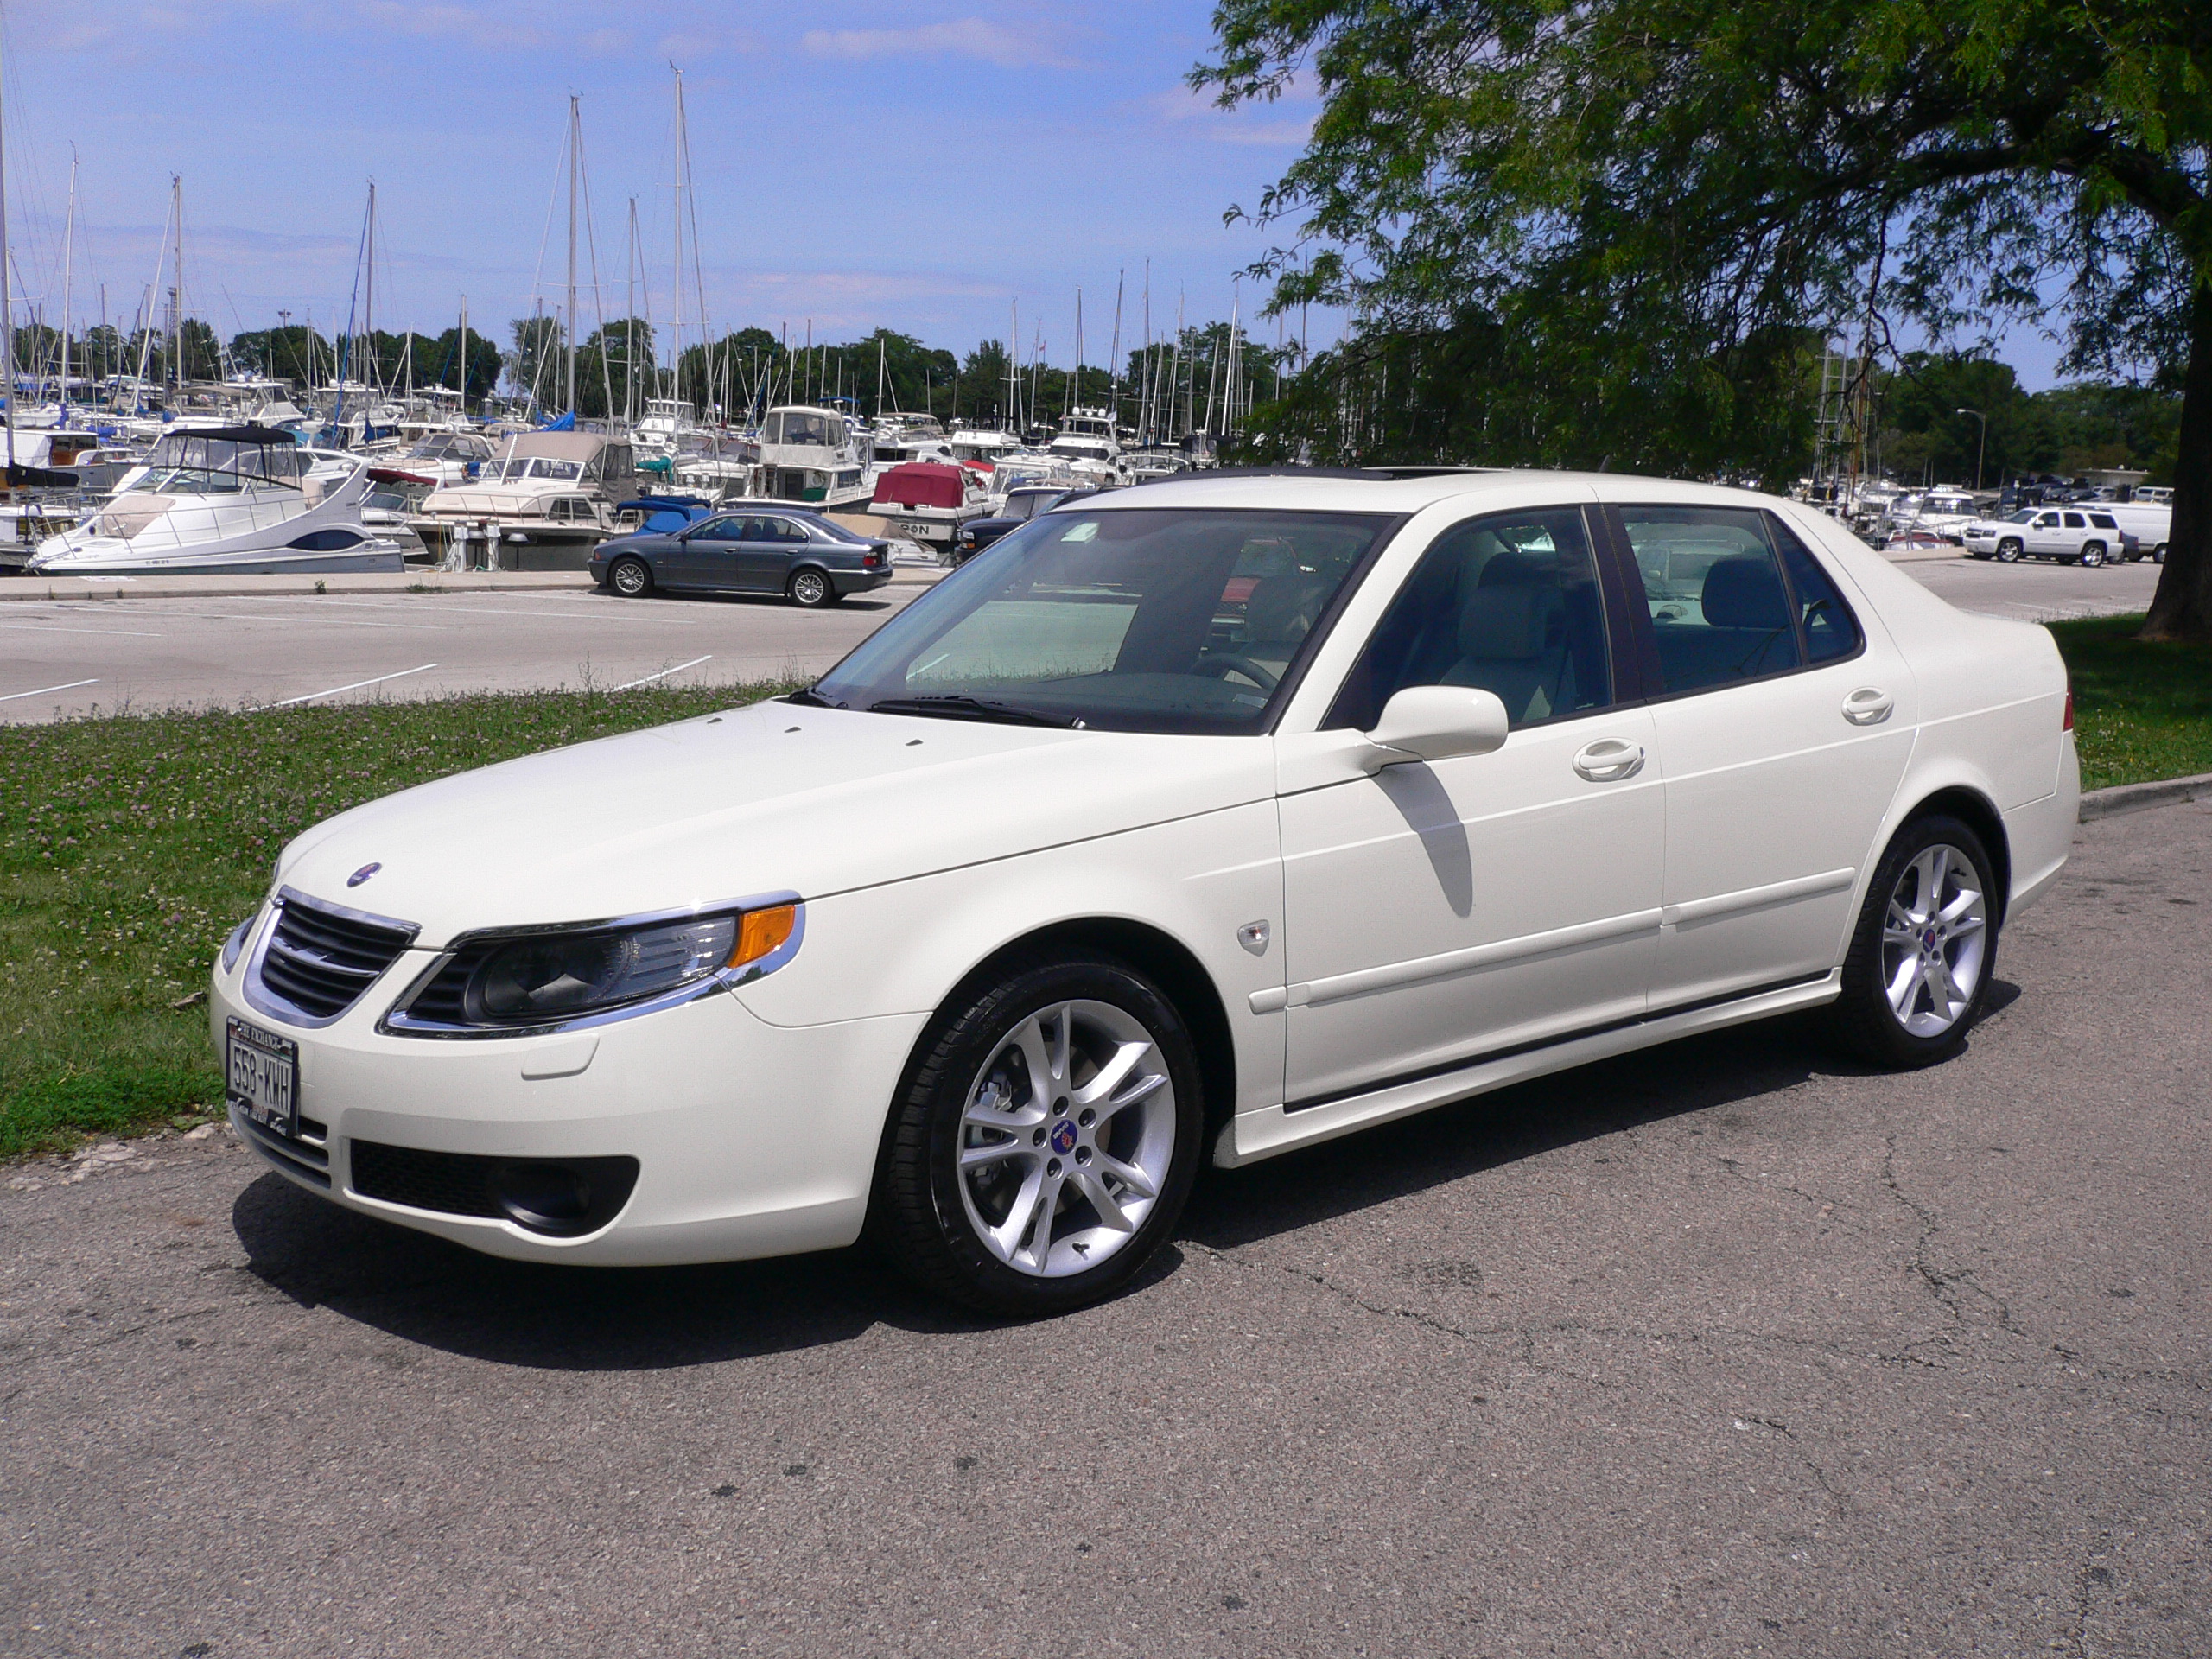 Saab best deal offer with 9-5 #2